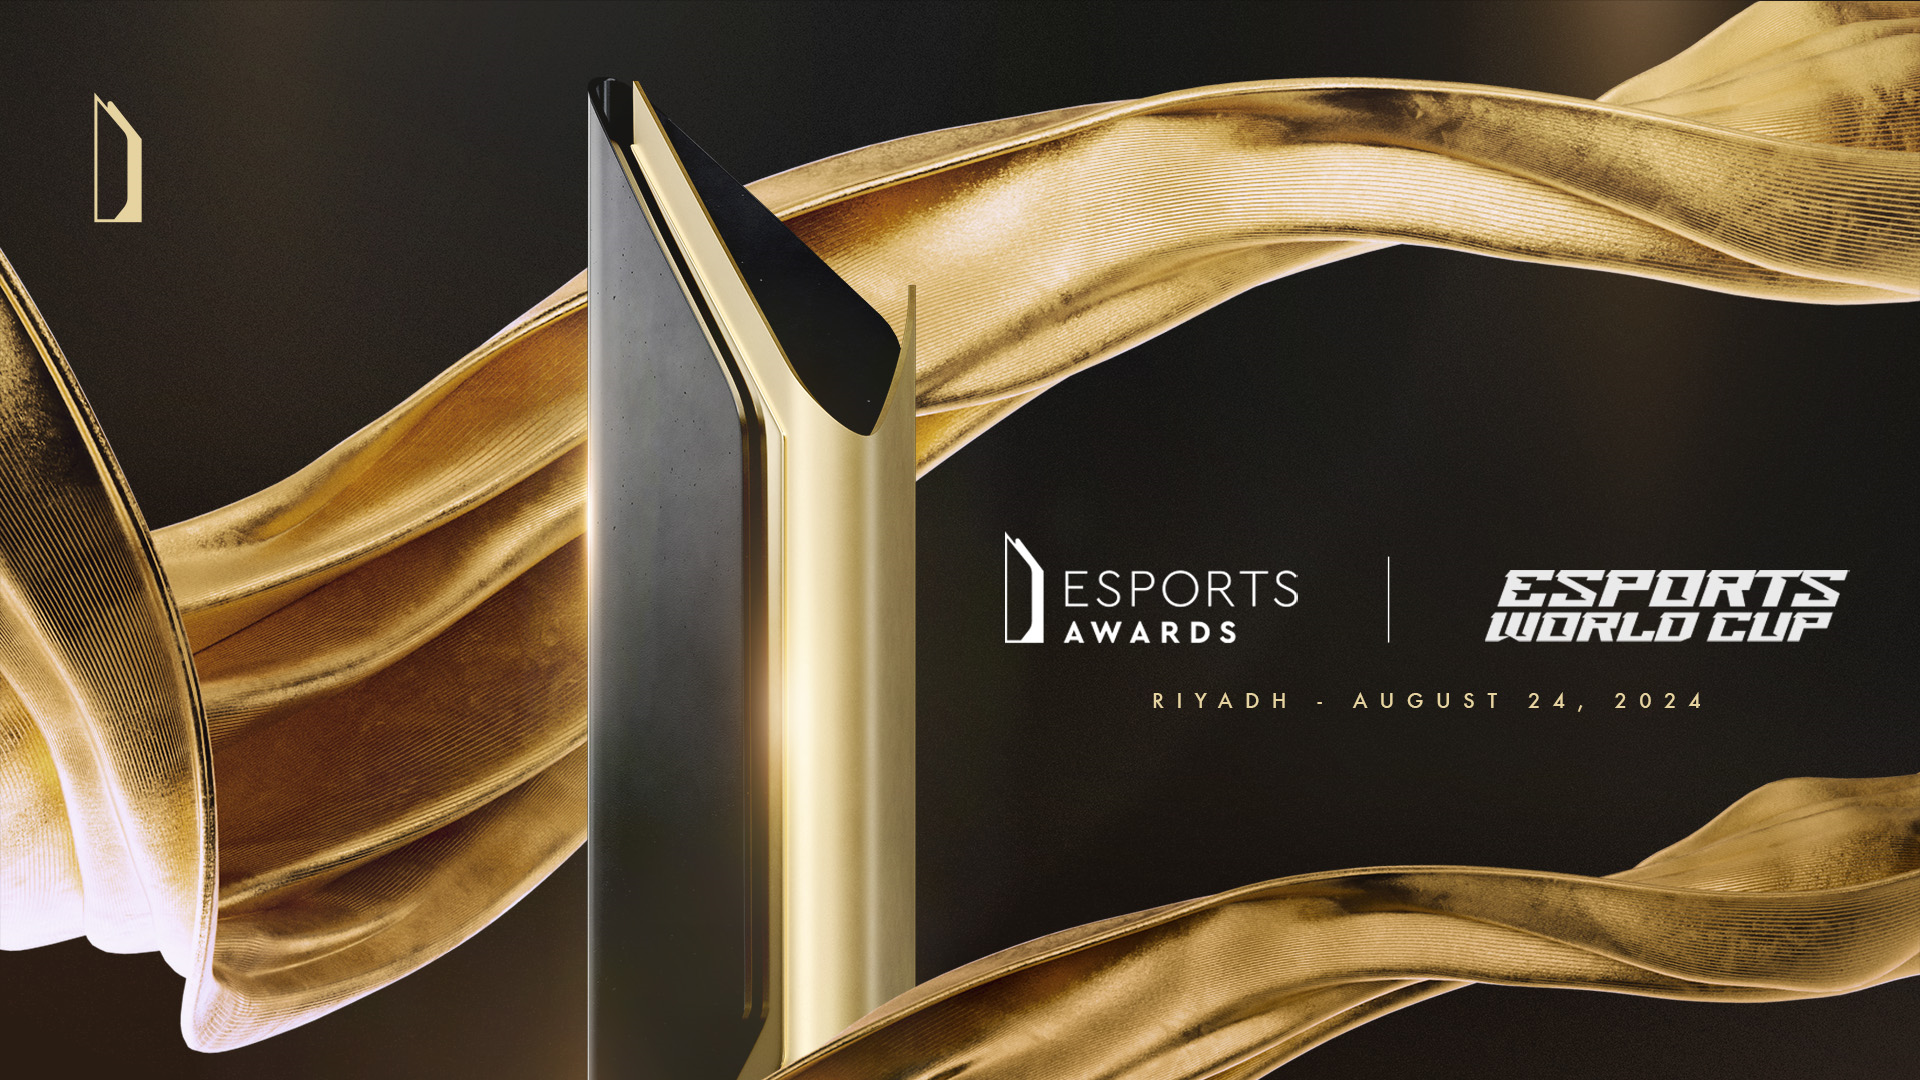 Esports Awards 2024: Finalists, Categories, Schedule and More